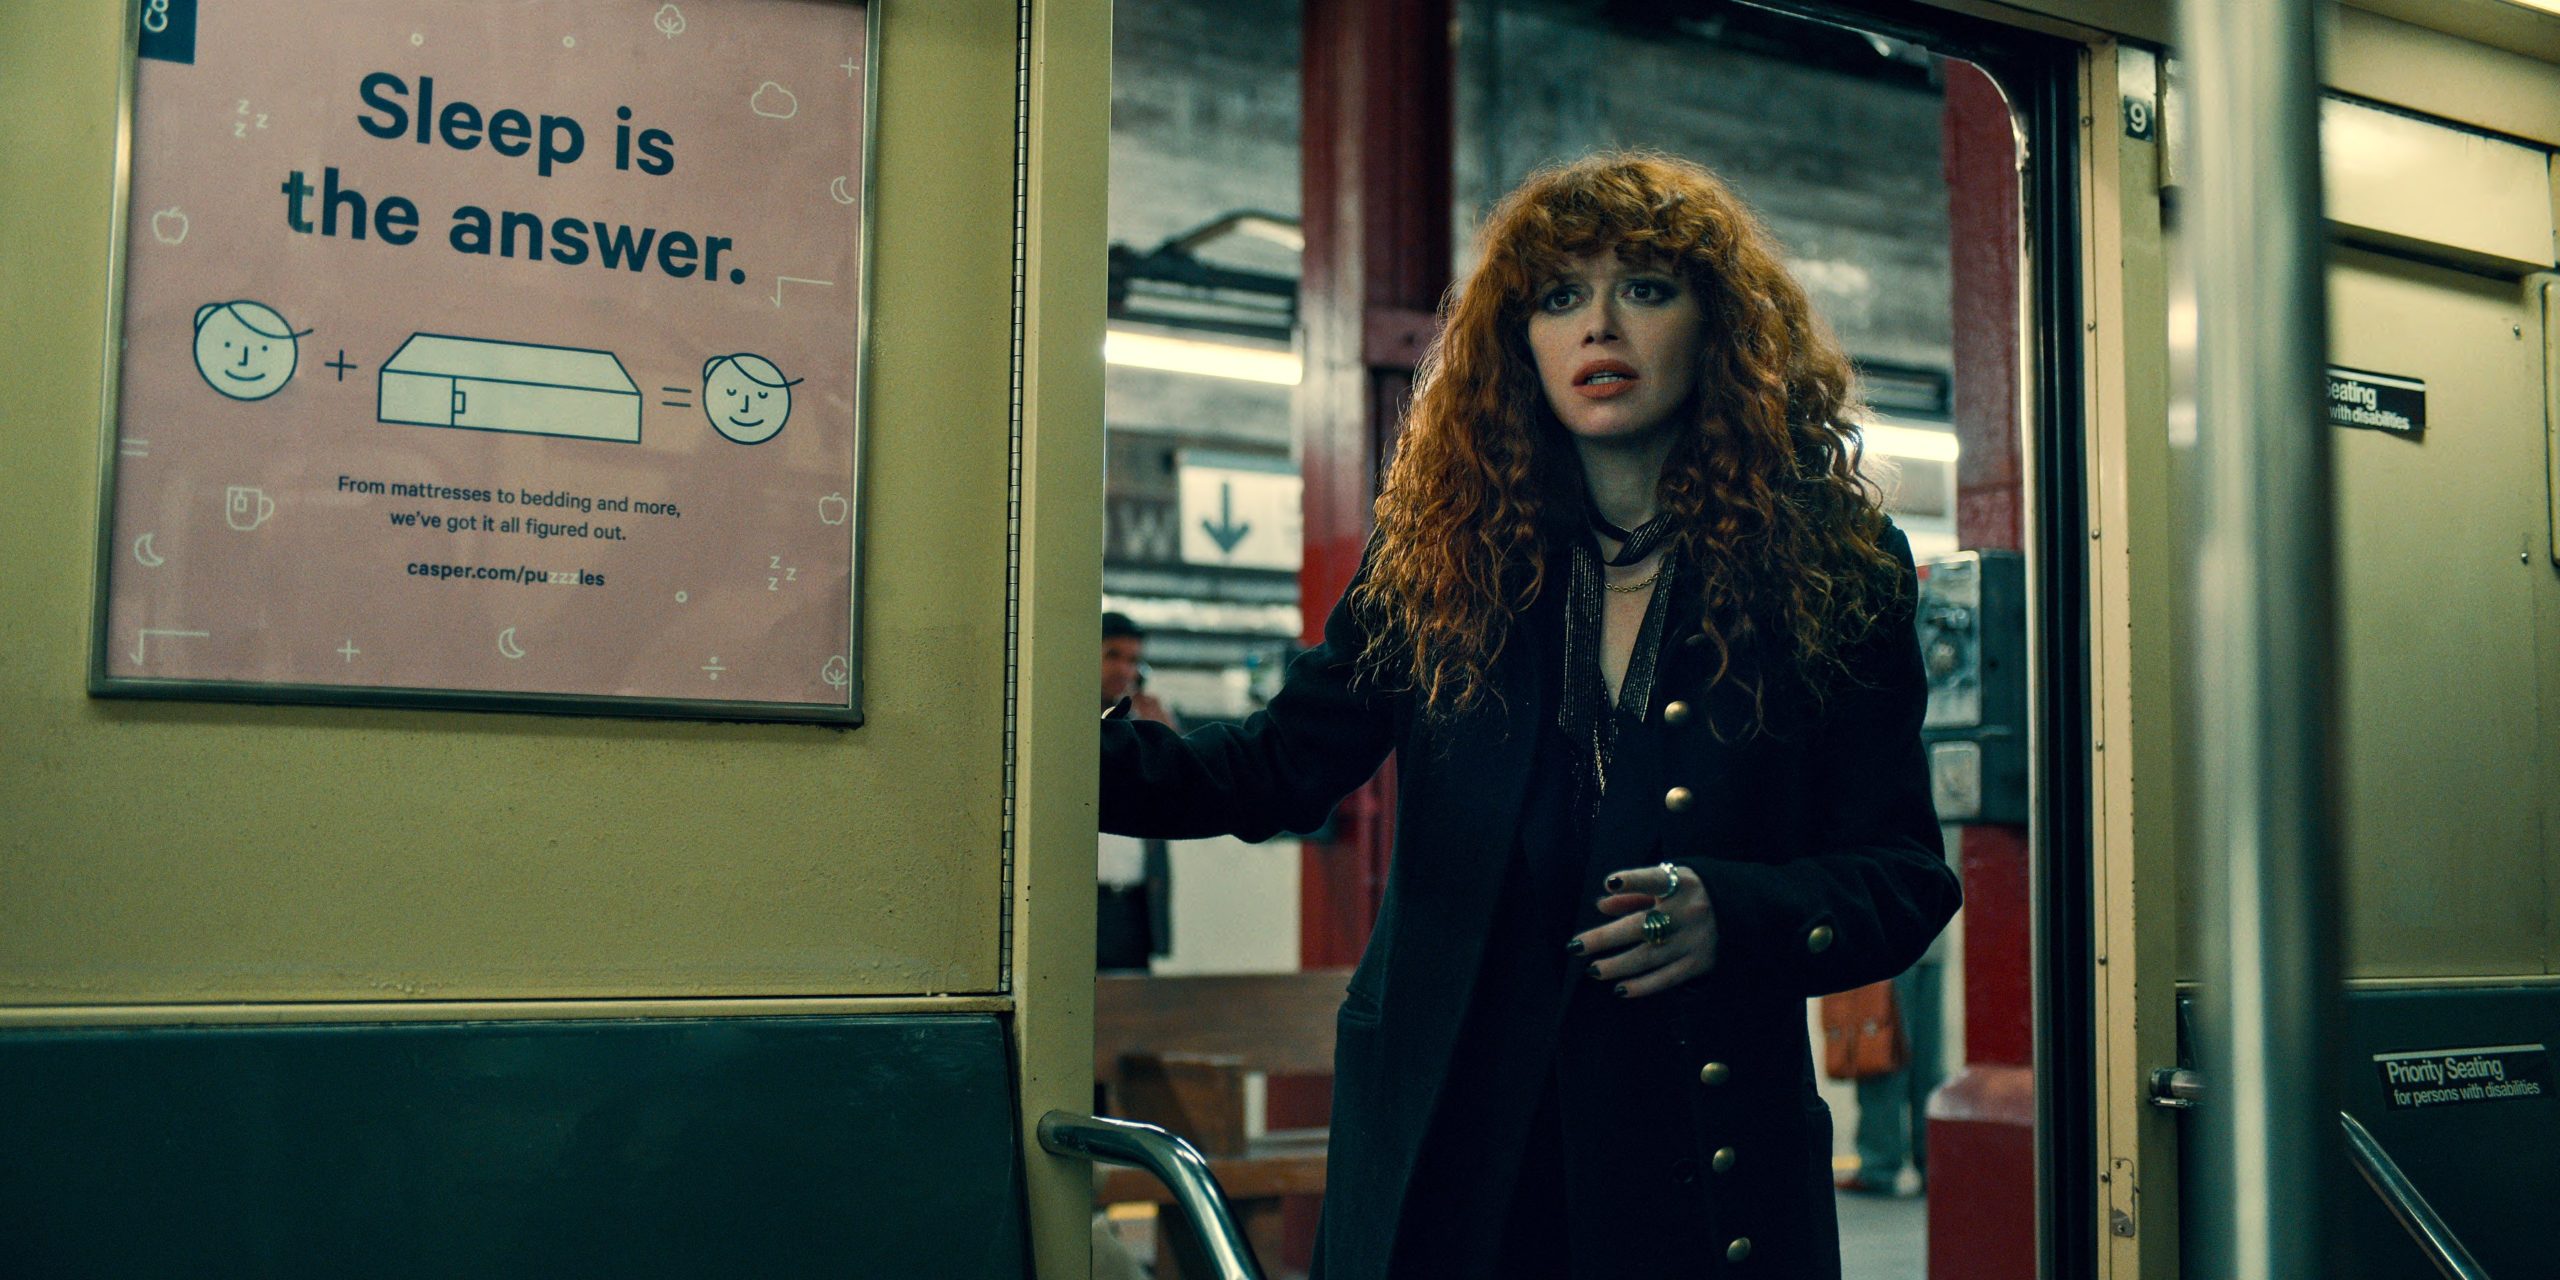 Russian Doll and Poker Face star Natasha Lyonne is the latest to be cast in The Fantastic Four in an unknown role.